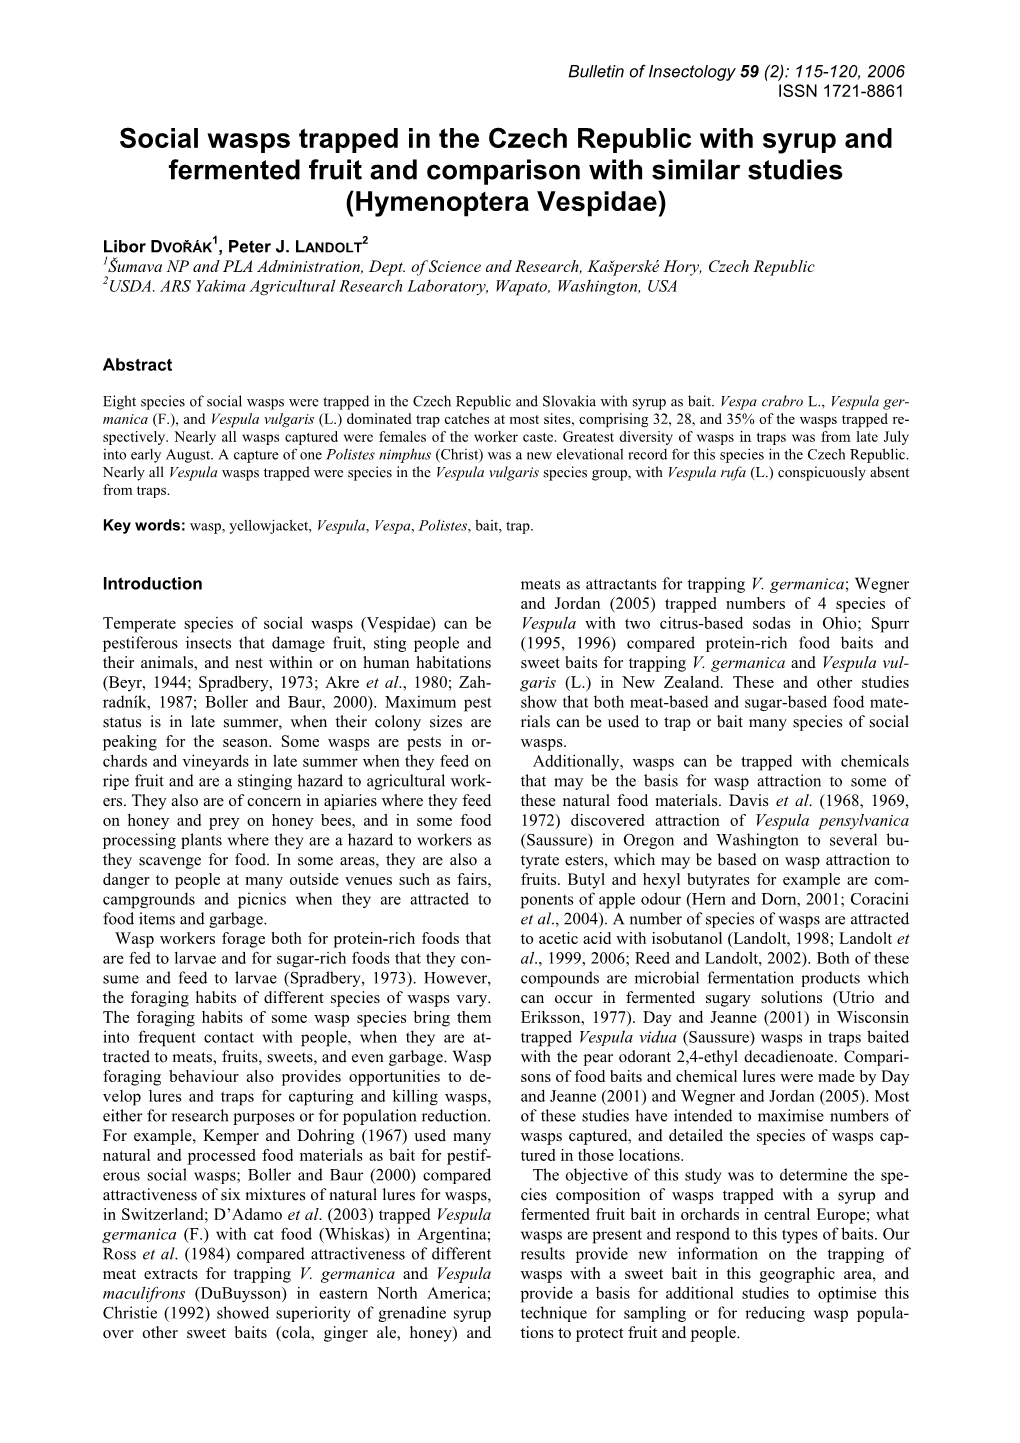 Social Wasps Trapped in the Czech Republic with Syrup and Fermented Fruit and Comparison with Similar Studies (Hymenoptera Vespidae)